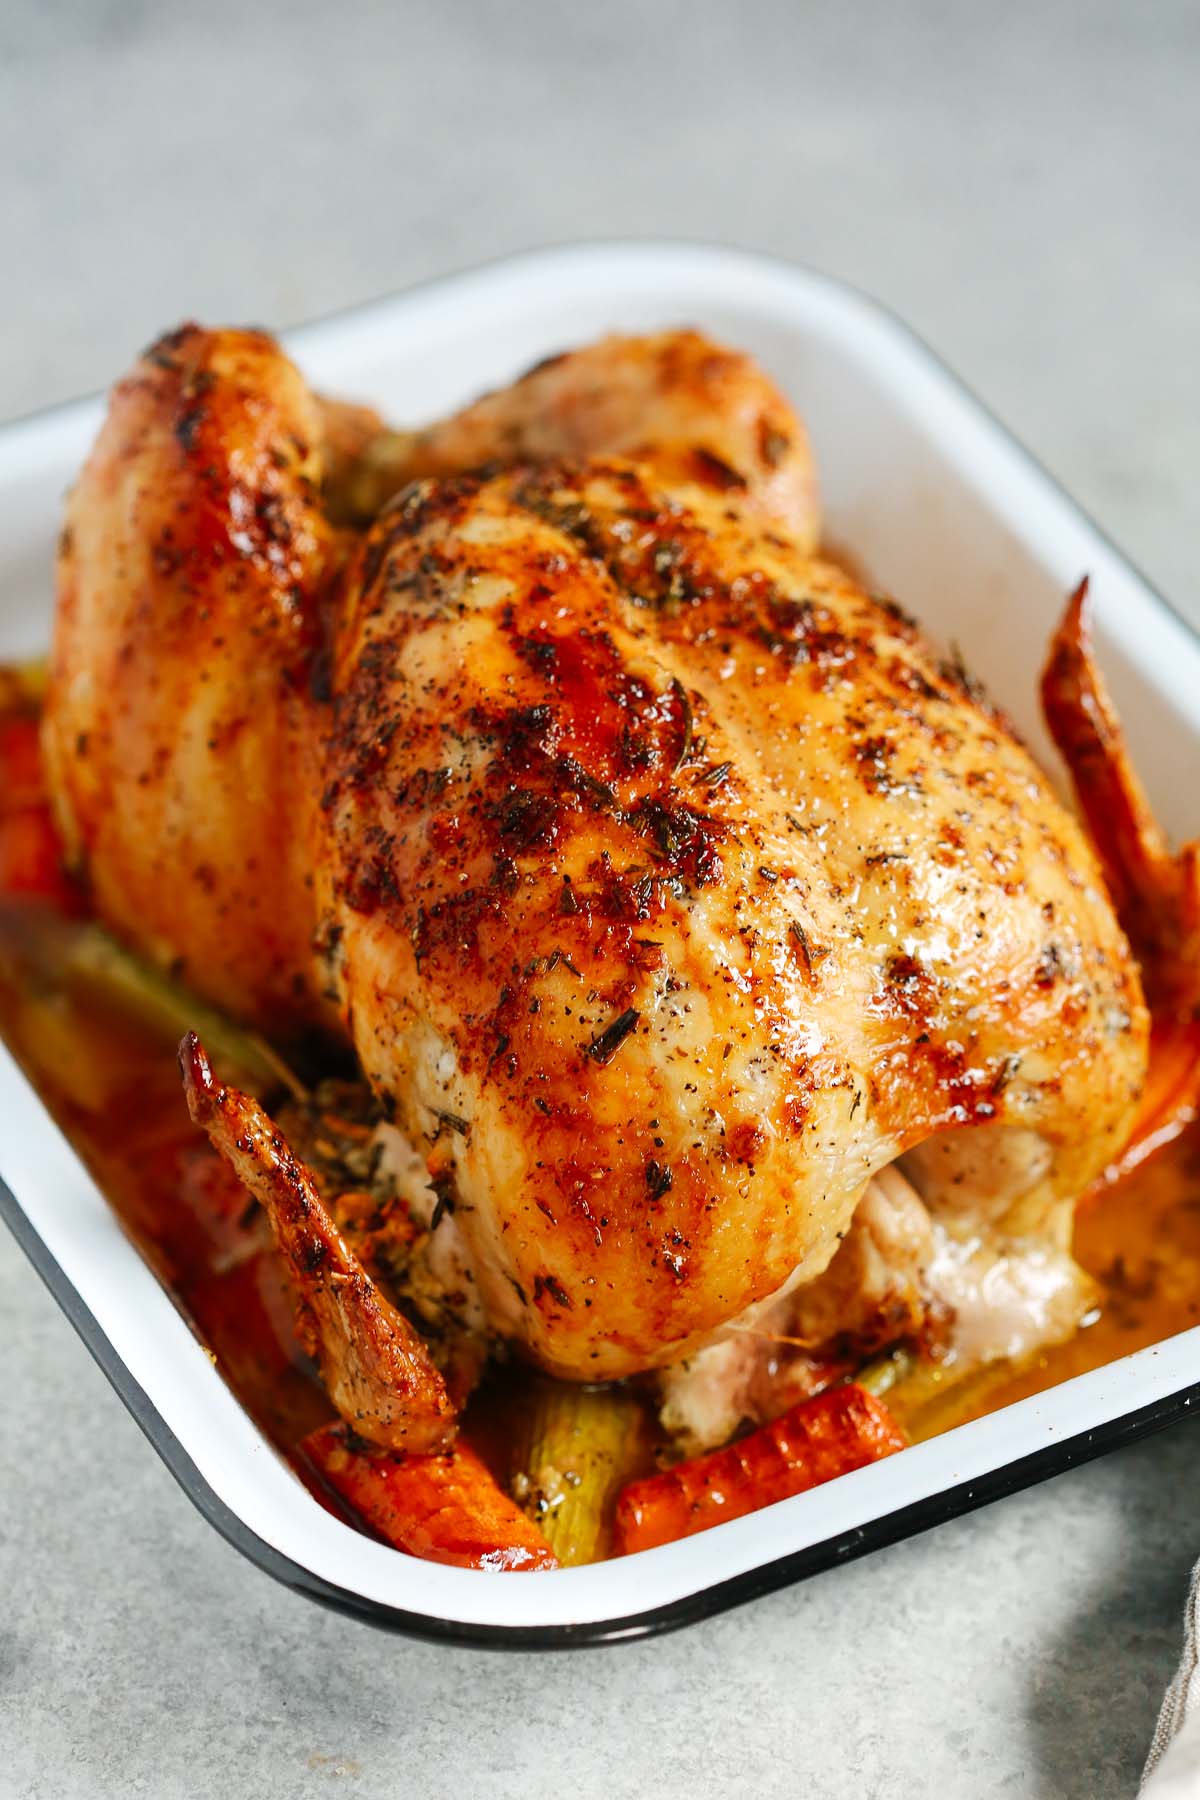 Photo of a roasted whole chicken inside of a white roasting pan.